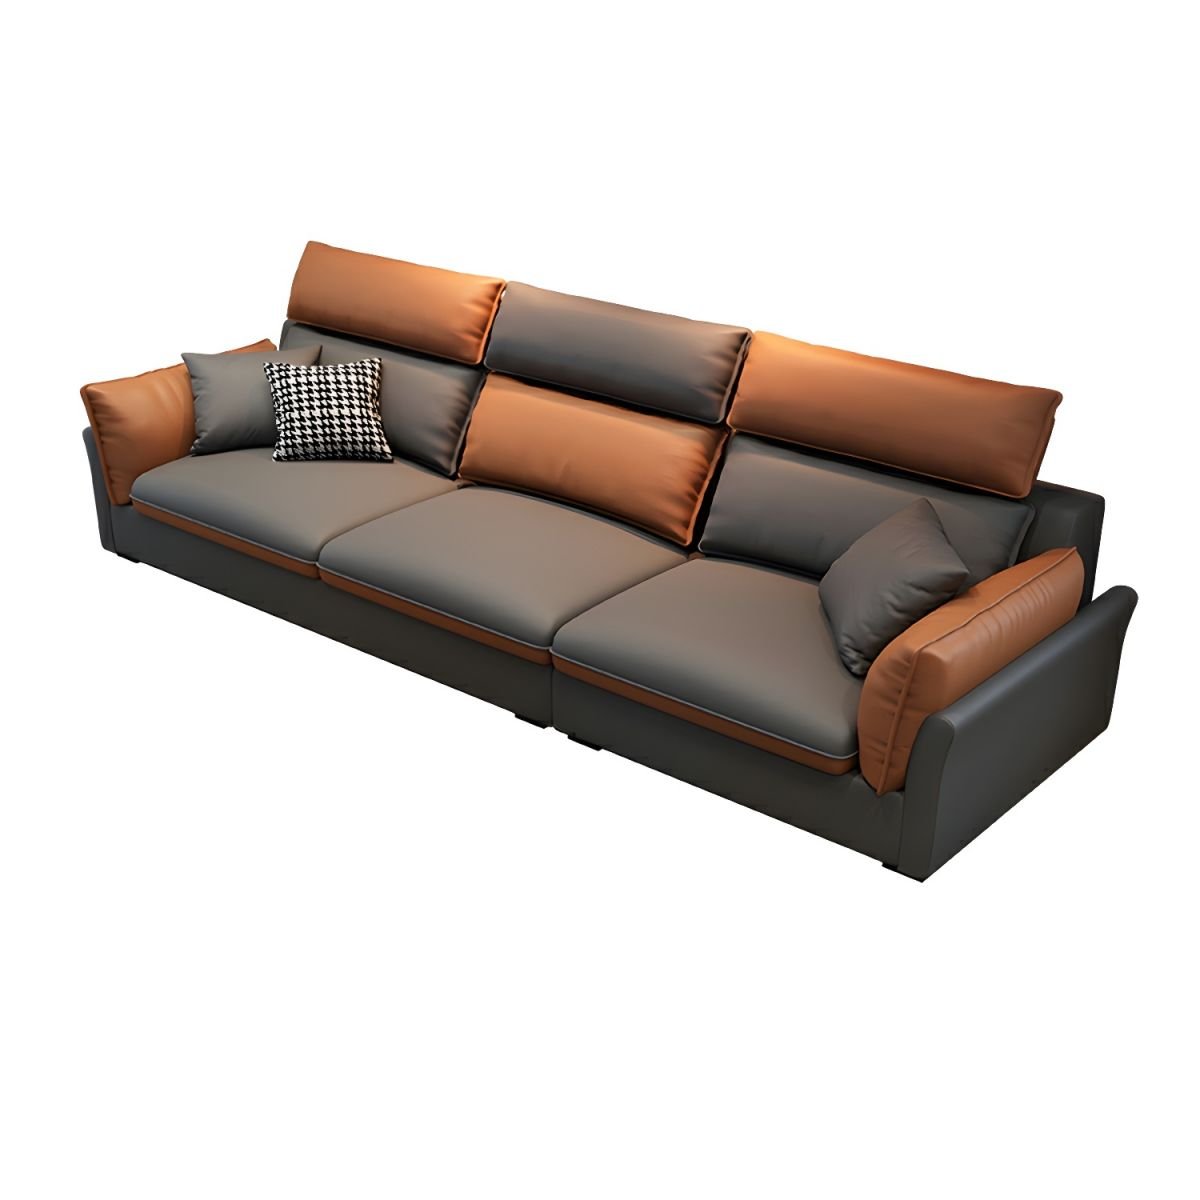 Contemporary Pillow Top Arm Sectional Sofa in Gray and Orange with Adjustable Back - 98.4"L x 35.4"W x 31.5"H Tech Cloth